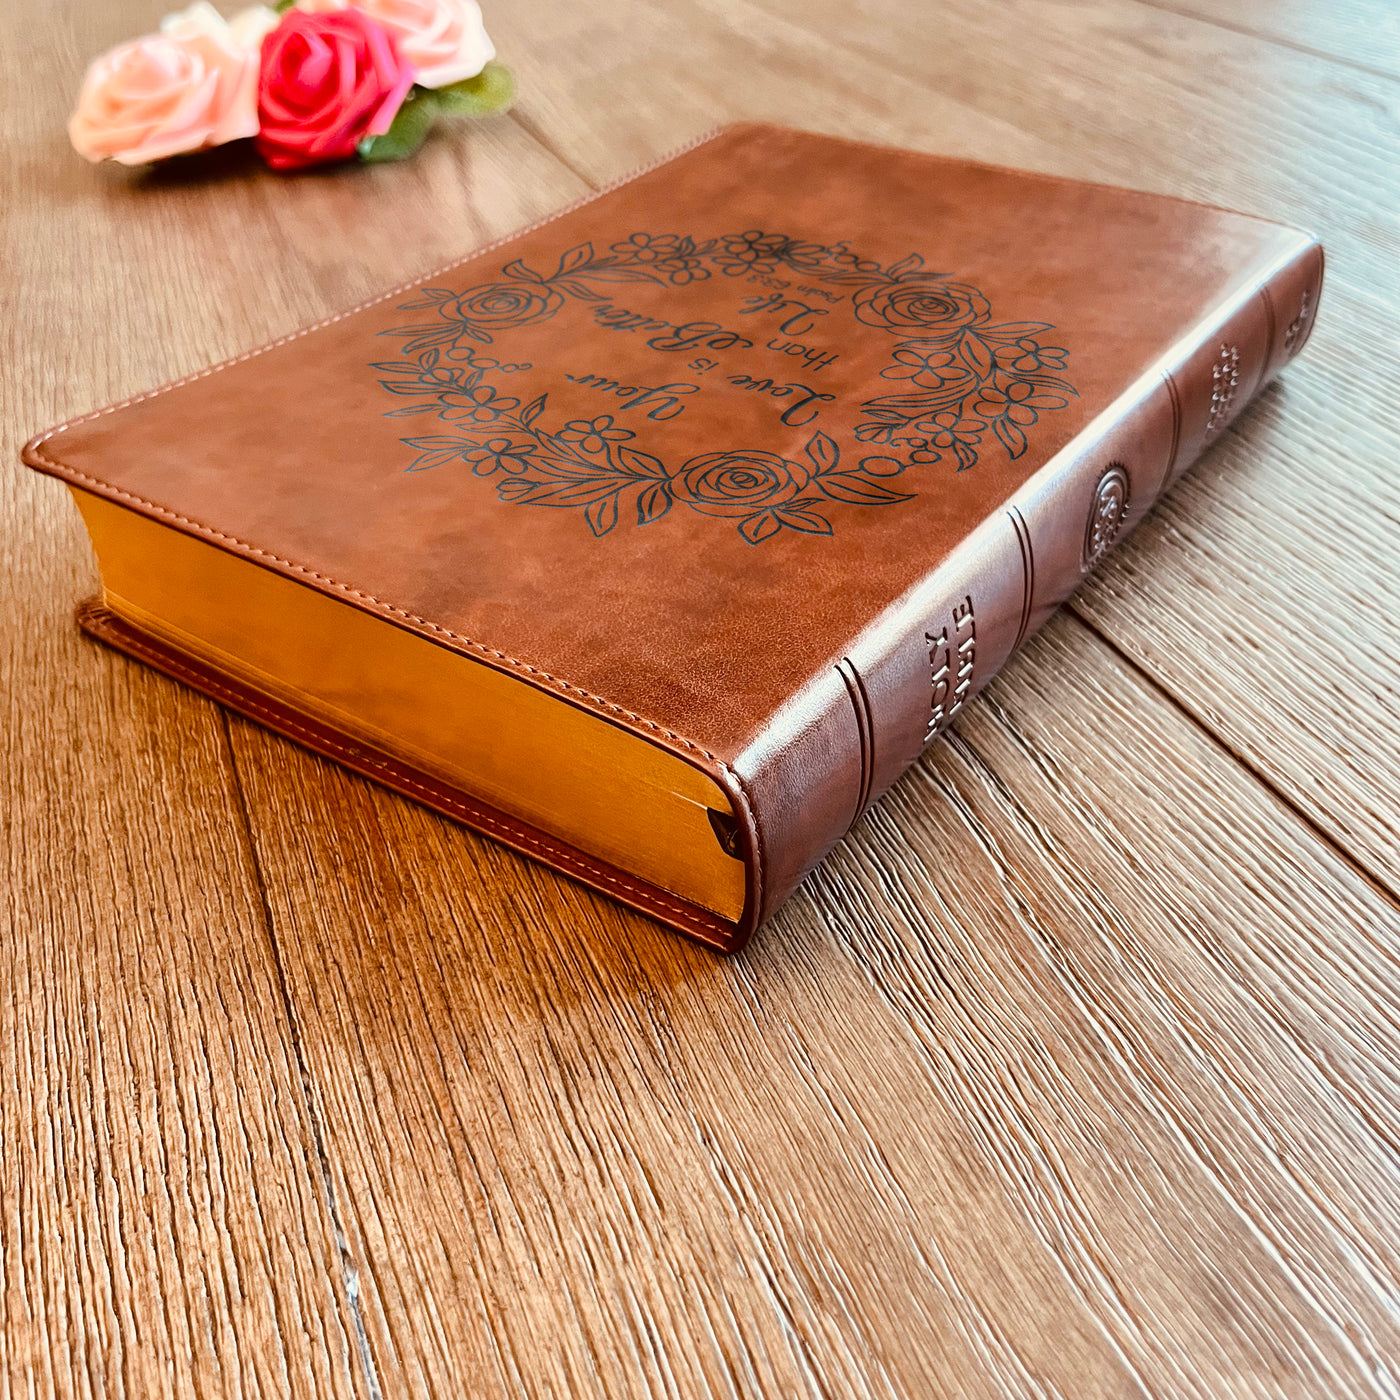 Personalized ESV Bible | Custom Bible Engraved English Standard Version | Christian Gifts Religious Gifts Baptism Gifts ESV Bible Women Men